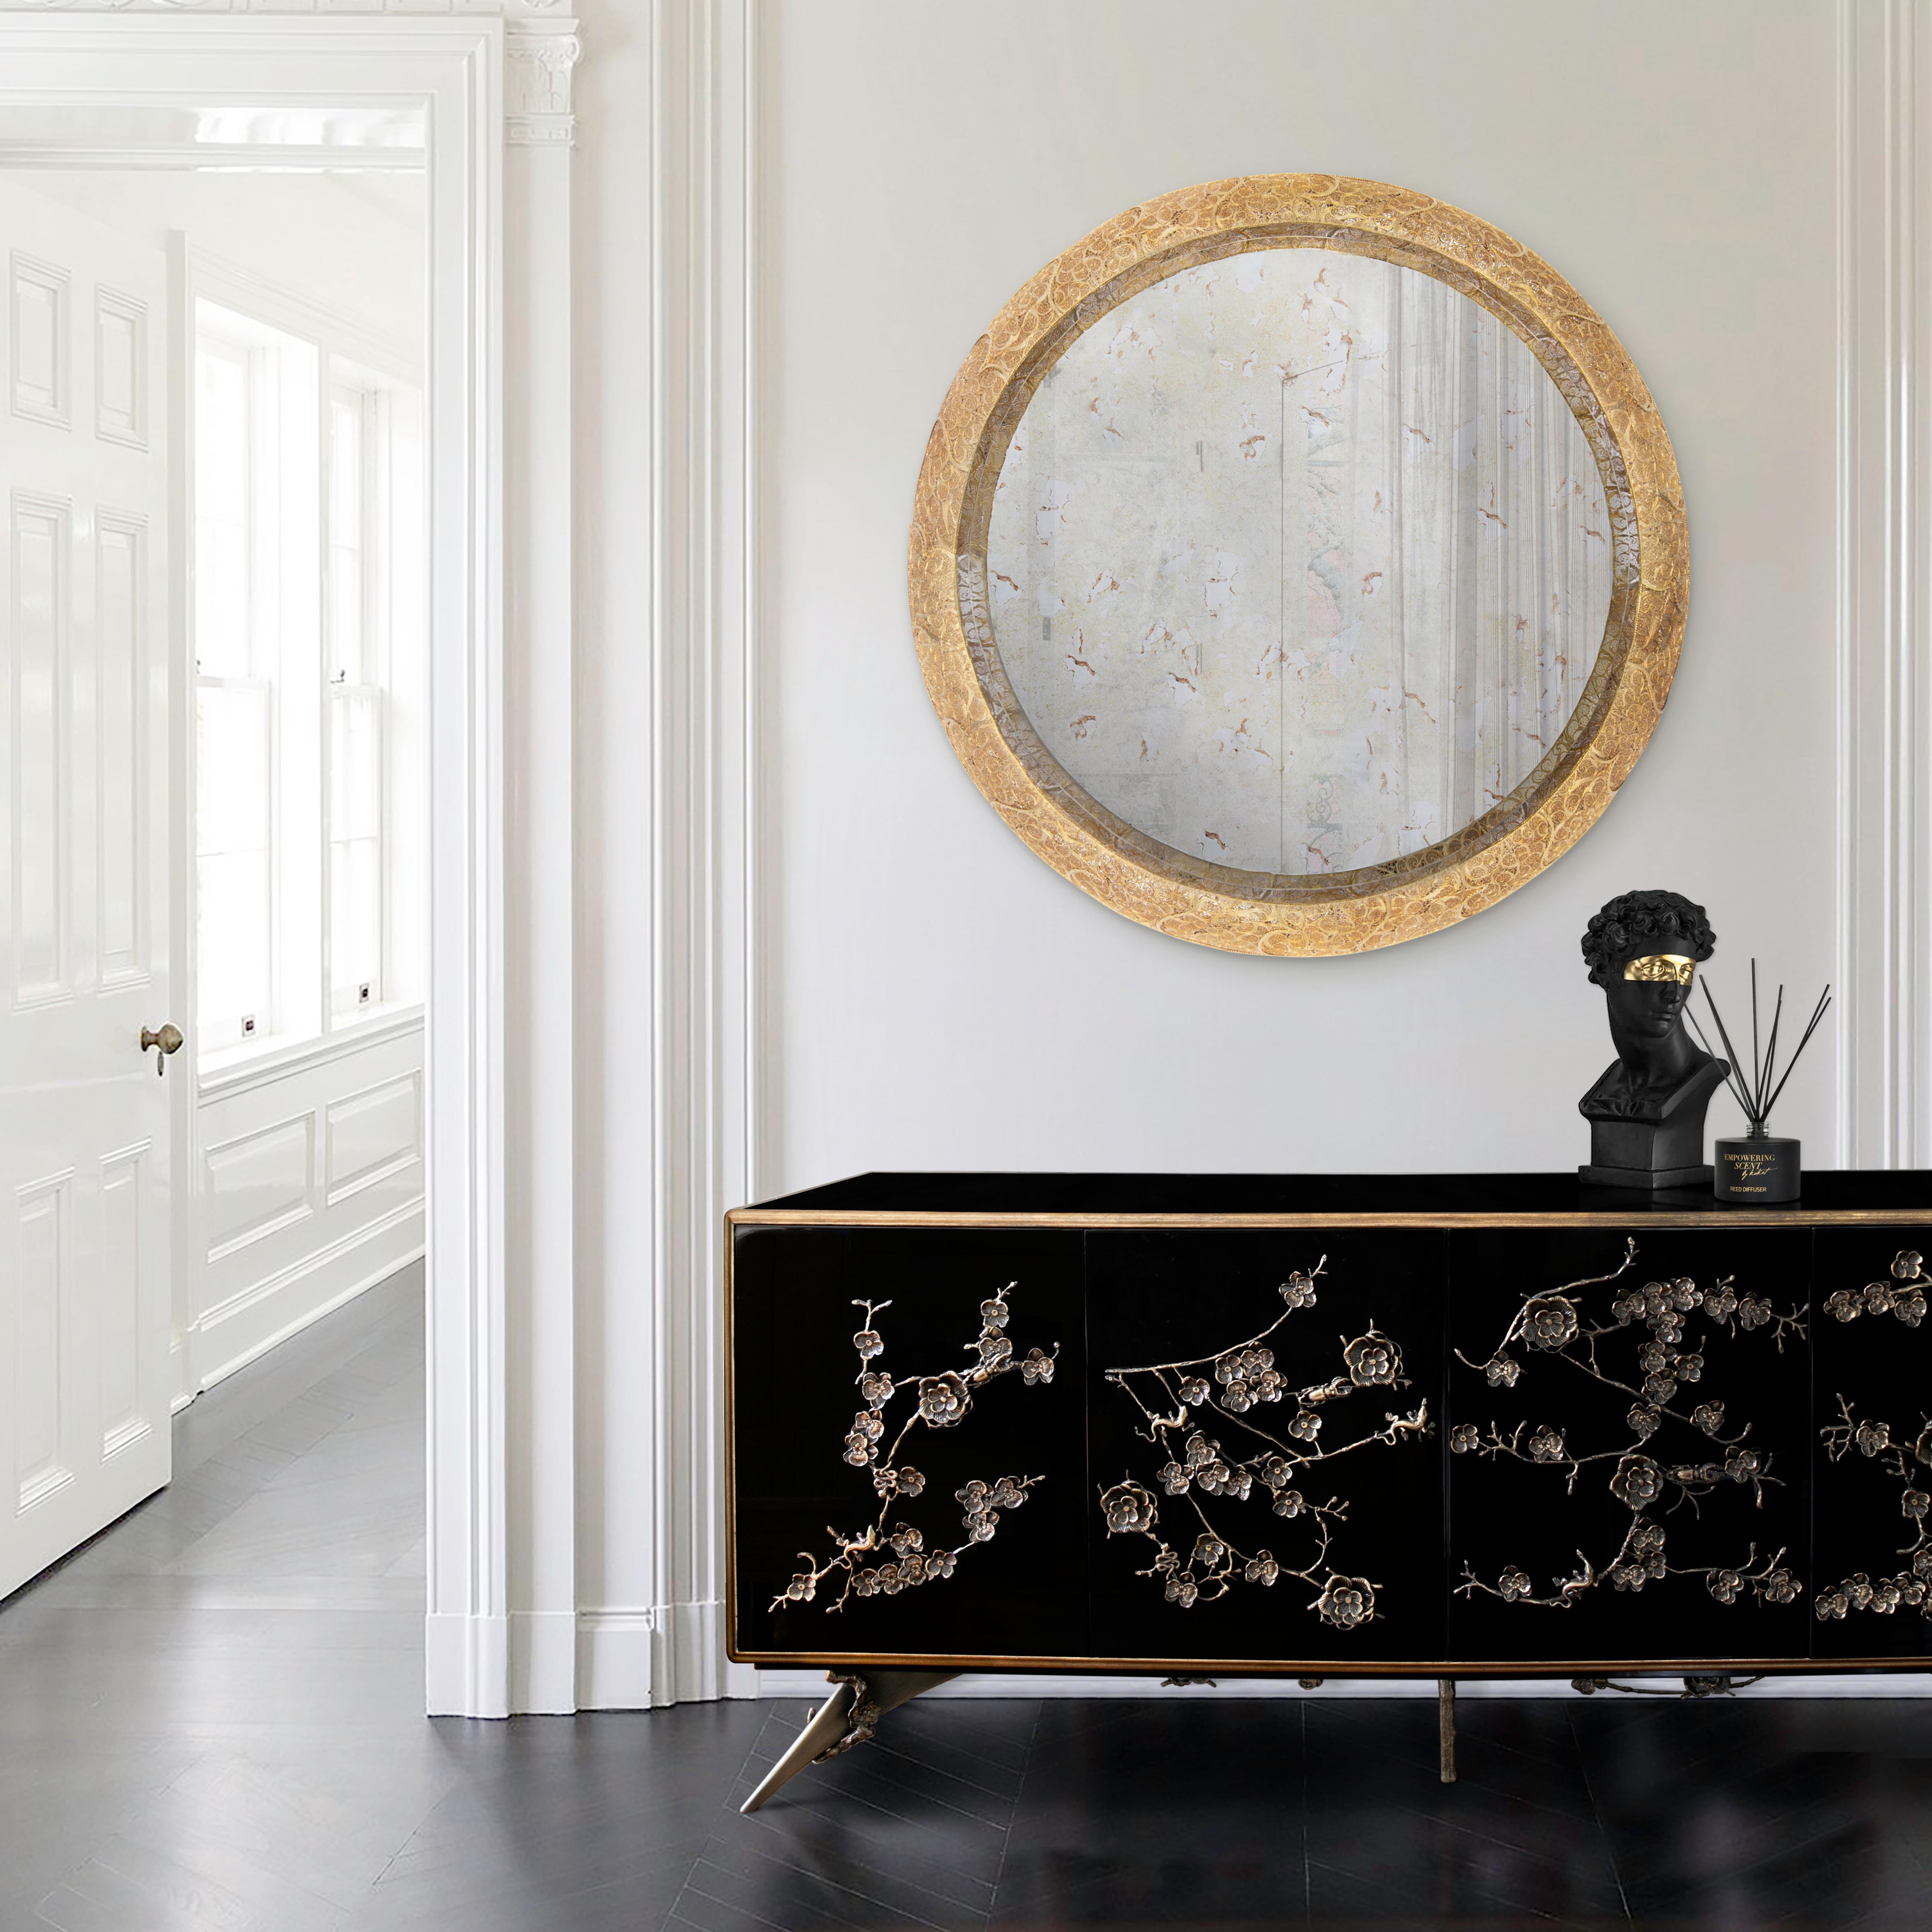 There is a sense of reveal and conceal as KOKET takes a beautiful chest in high gloss lacquer and adorns it in metal organic lace, revealing a mesmerizing hint of what lies beneath. Interior opens to four drawers embellished with organic hardware